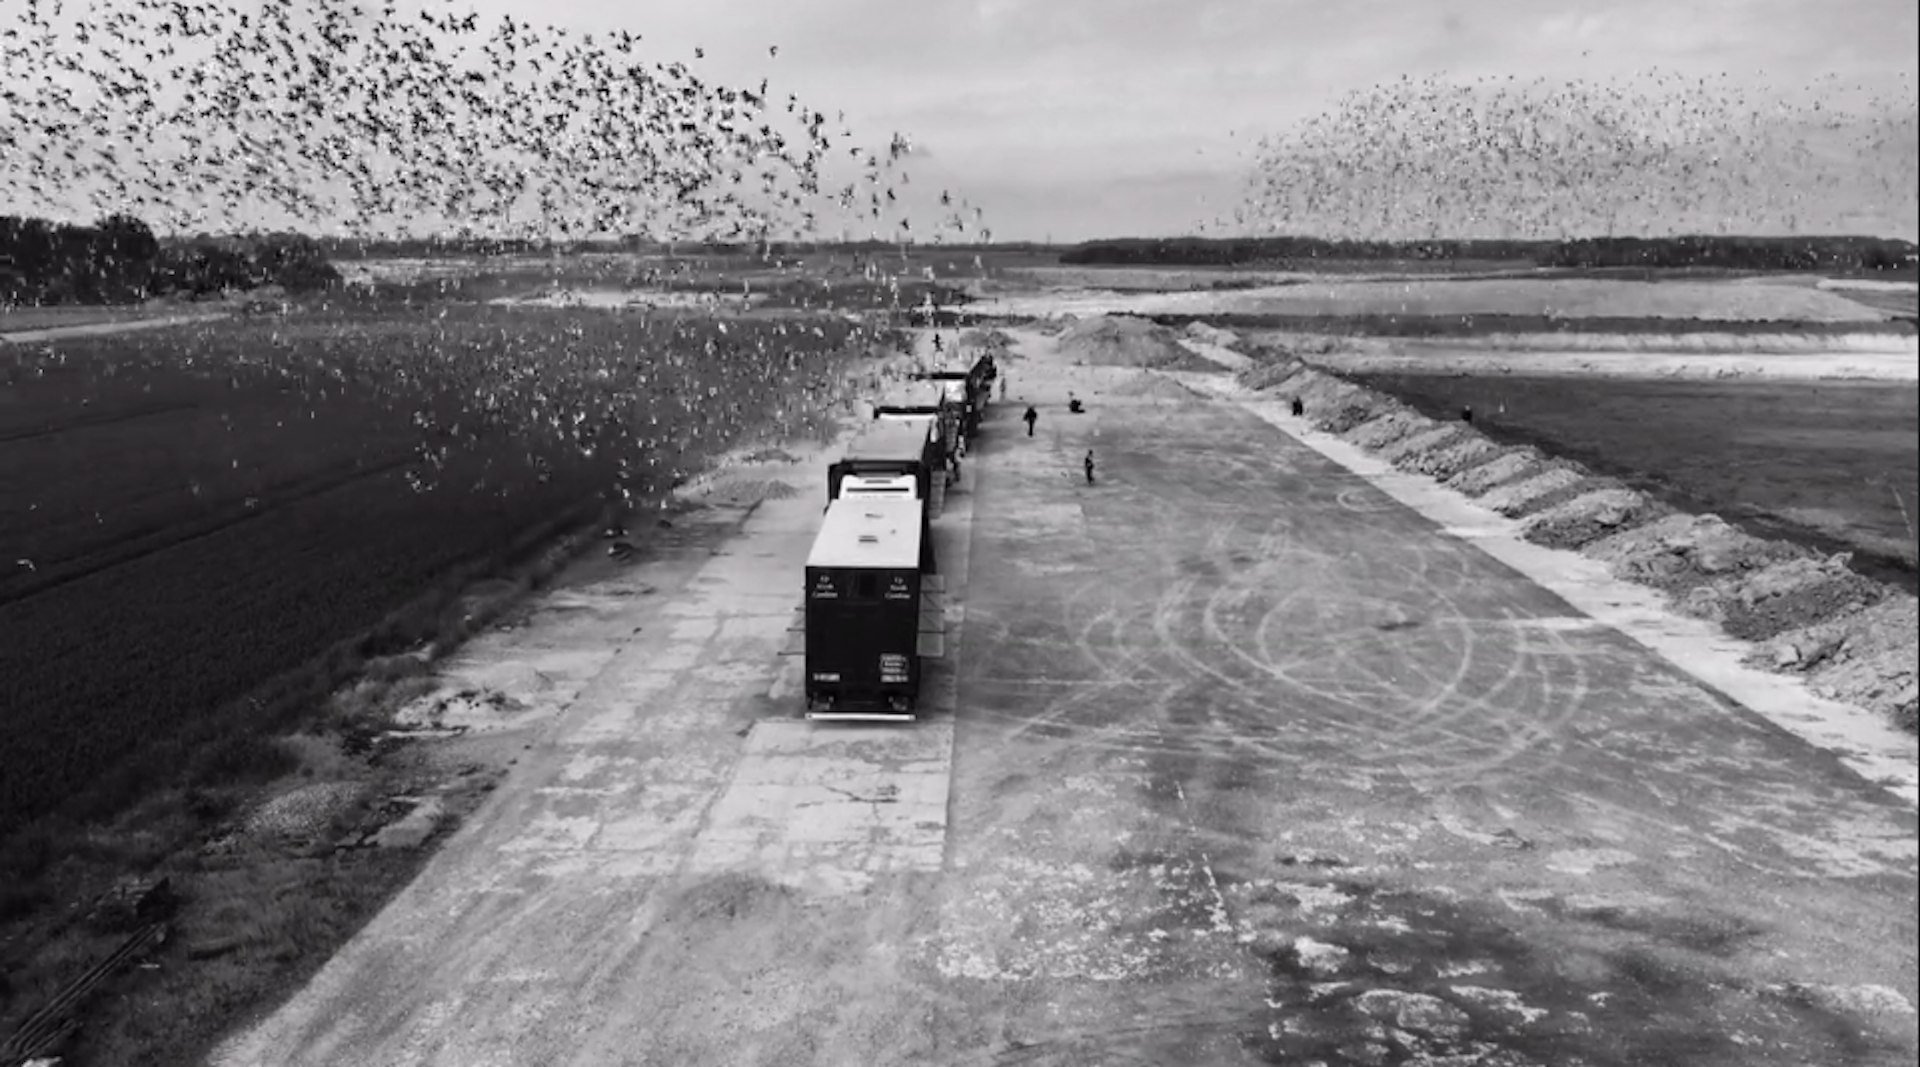 This short abstract doc explores the dying art of pigeon racing